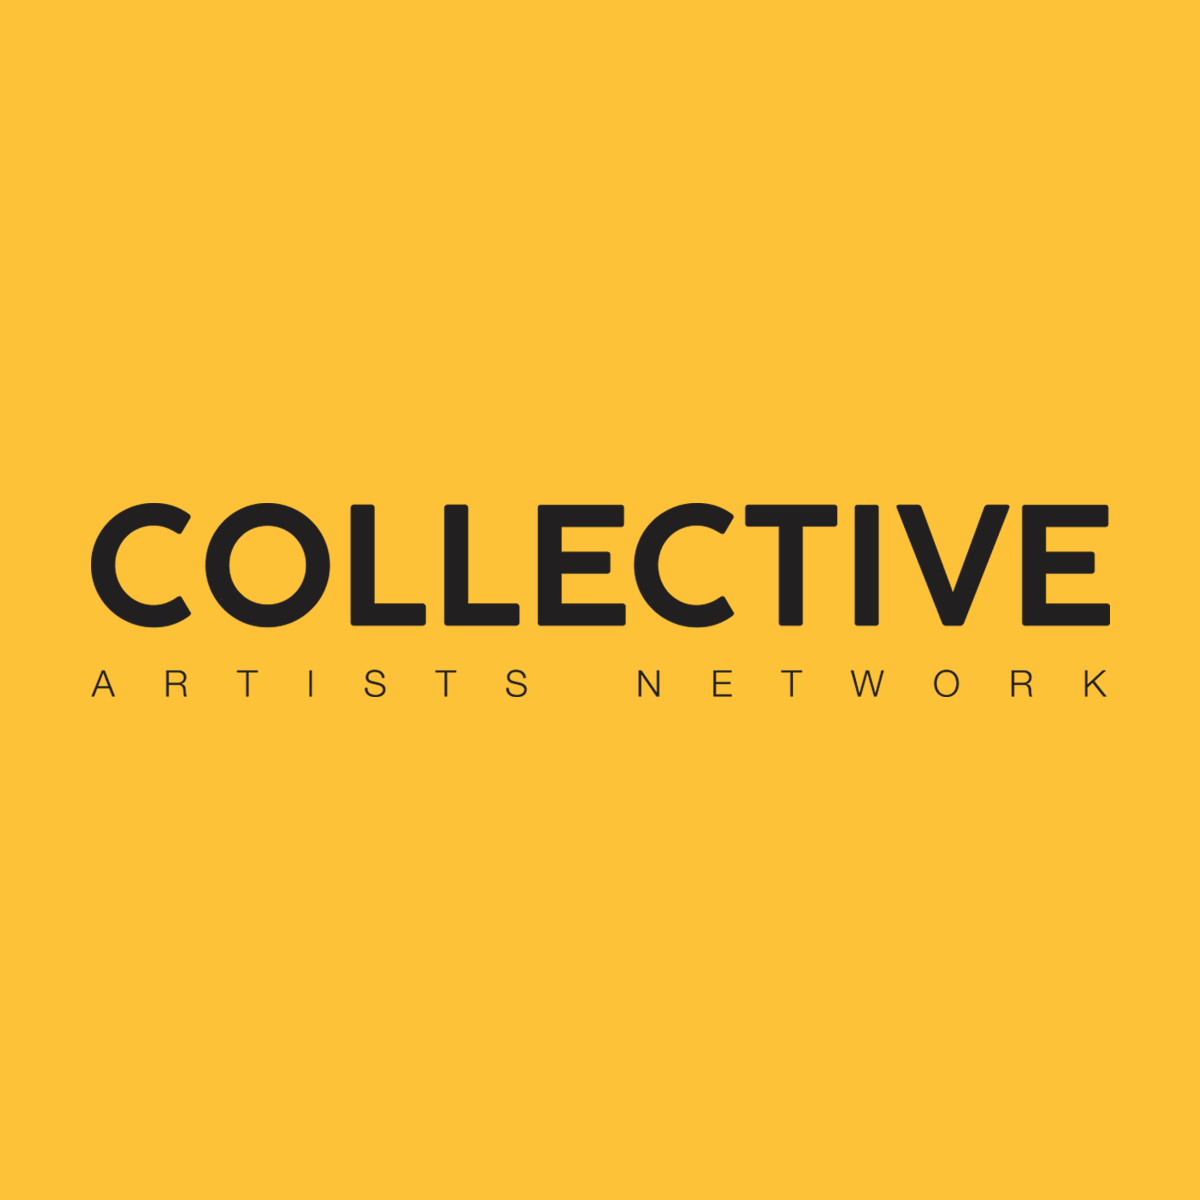 The Next Episode
Collective Artists Network - An Integrated Creative Community, POWERING DREAMS. #KWAN #CollectiveArtistsNetwork